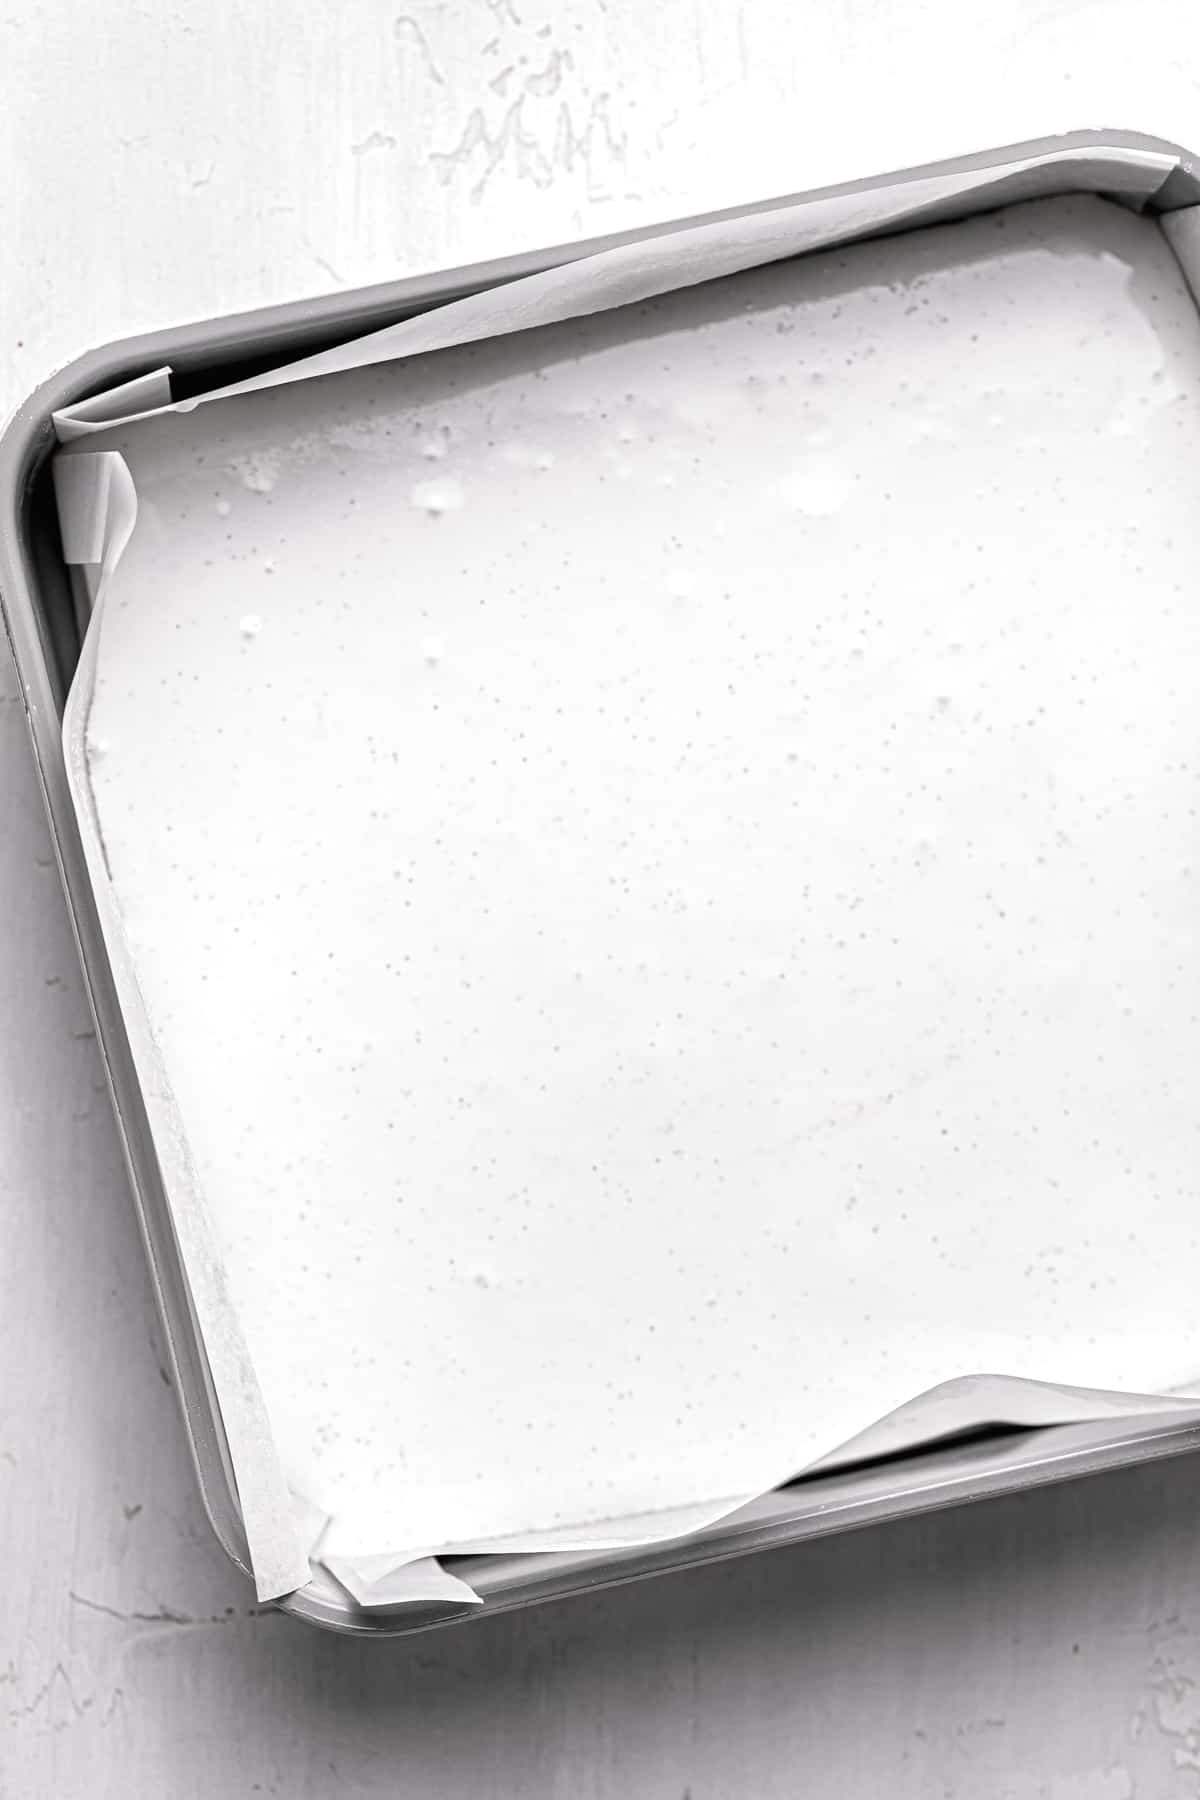 marshmallow mixture in square pan.